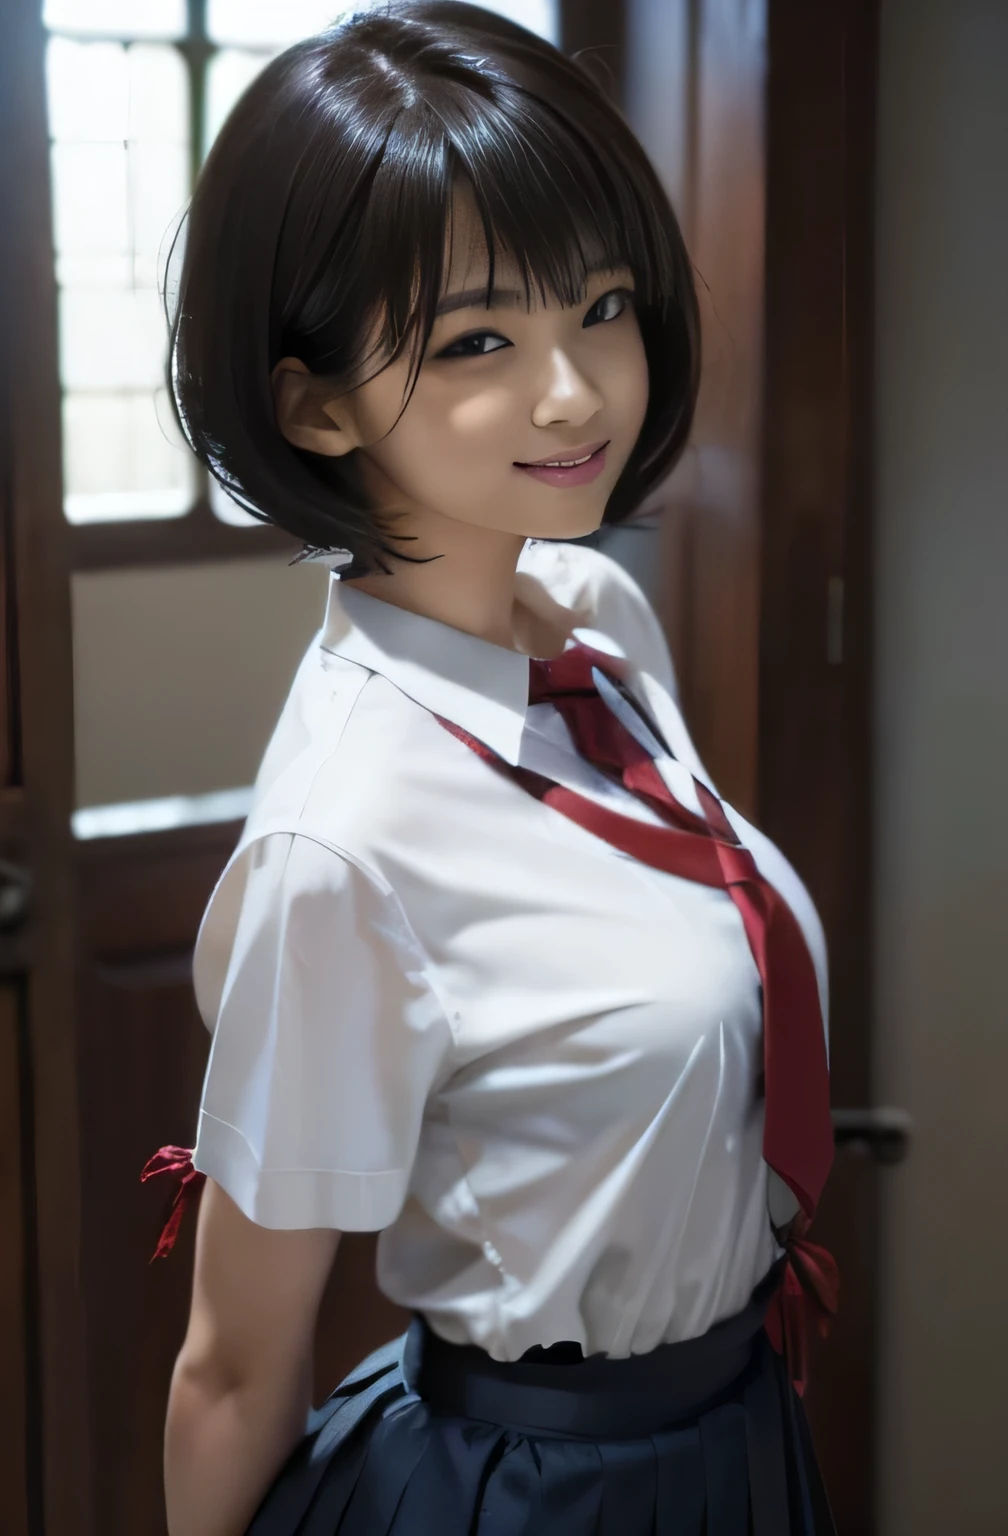 highest quality、shape、 Very detailed、finely、 High resolution、8k wallpaper、Perfect dynamic shape、Beautiful 17 year old girl、A neat and mature high school girl、Beautiful face in every detail、Beautiful eyes in every detail、Rough skin、A faint smile、Small breasts、Bold sexy pose、((Schoolgirl uniform、short hair:1.4))、((Watching the audience、Smile))、((open chest shirt:1.3))、(((Loose tie:1.4)))